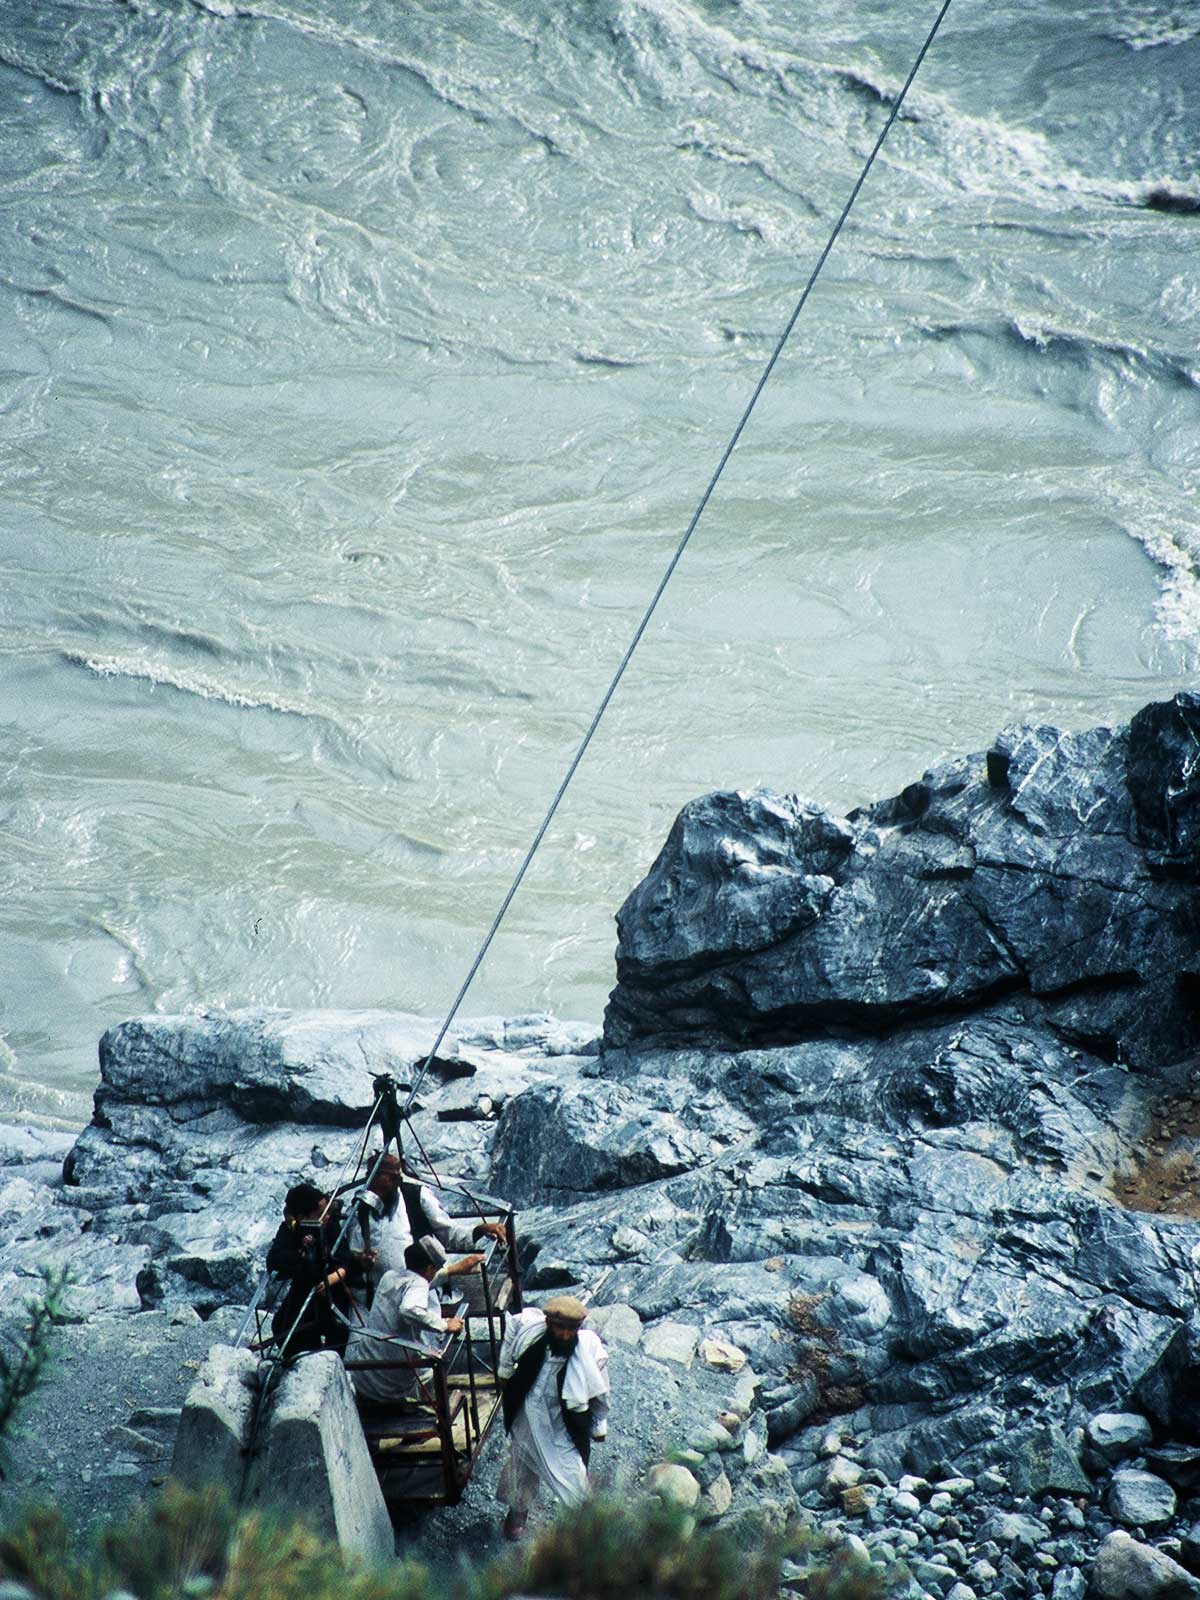 Crossing the Indus by single-cable chairlift | Shatial Pakistan | Study Abroad Photo Journal | Steven Andrew Martin | Learning Adventure